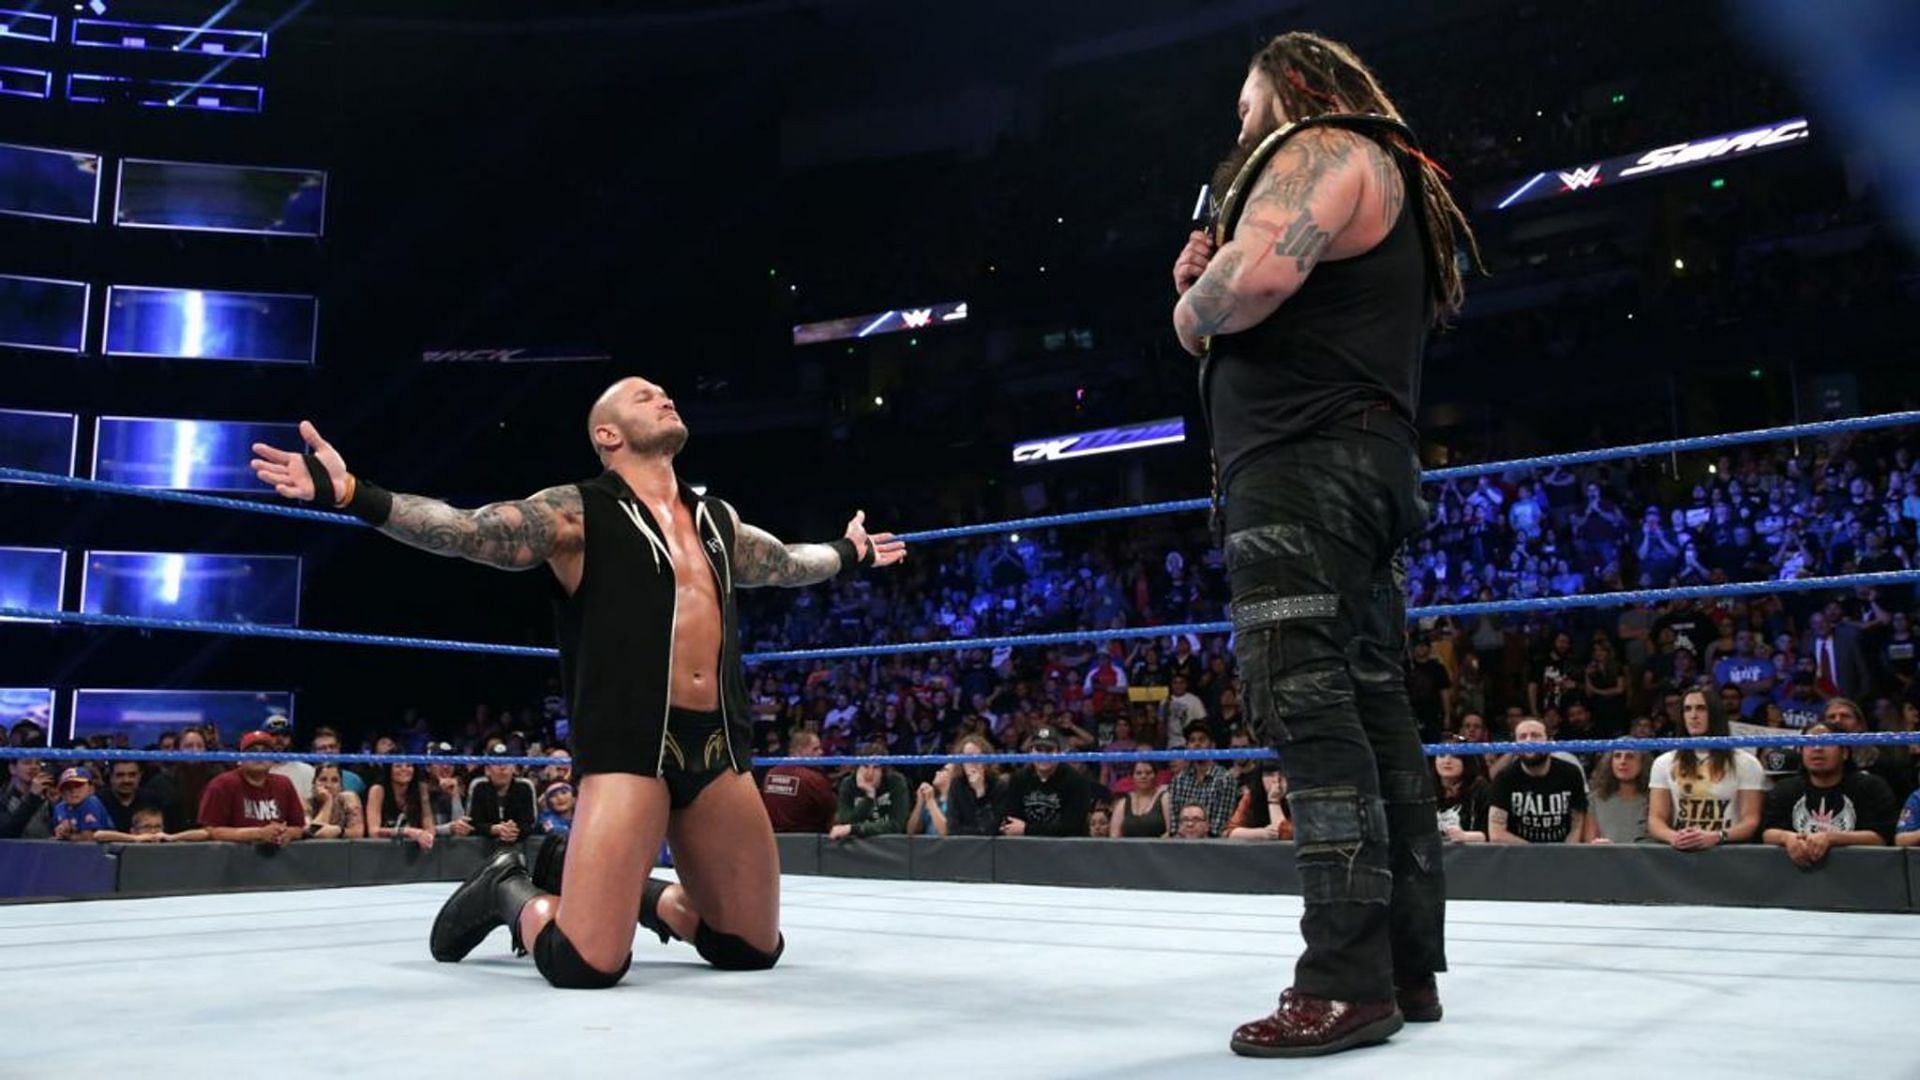 Randy Orton could get into another rivalry against Bray Wyatt.